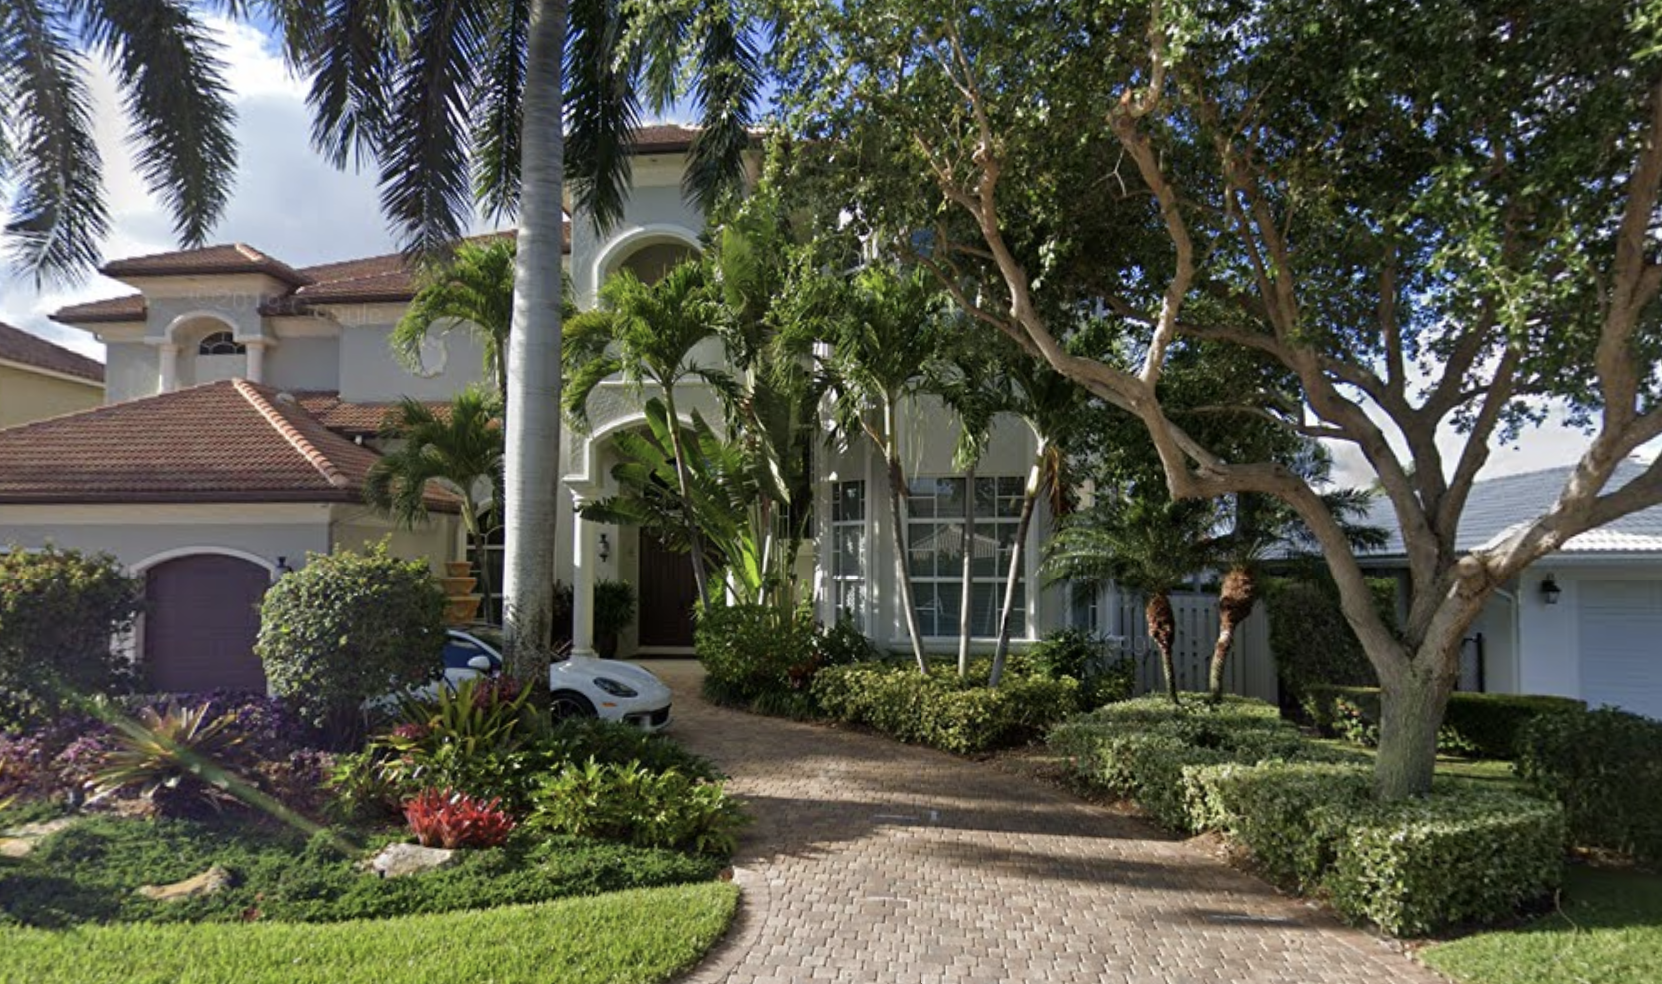 Home located on Banyan Dr, Delray Beach with address matching that of Marc Sporn